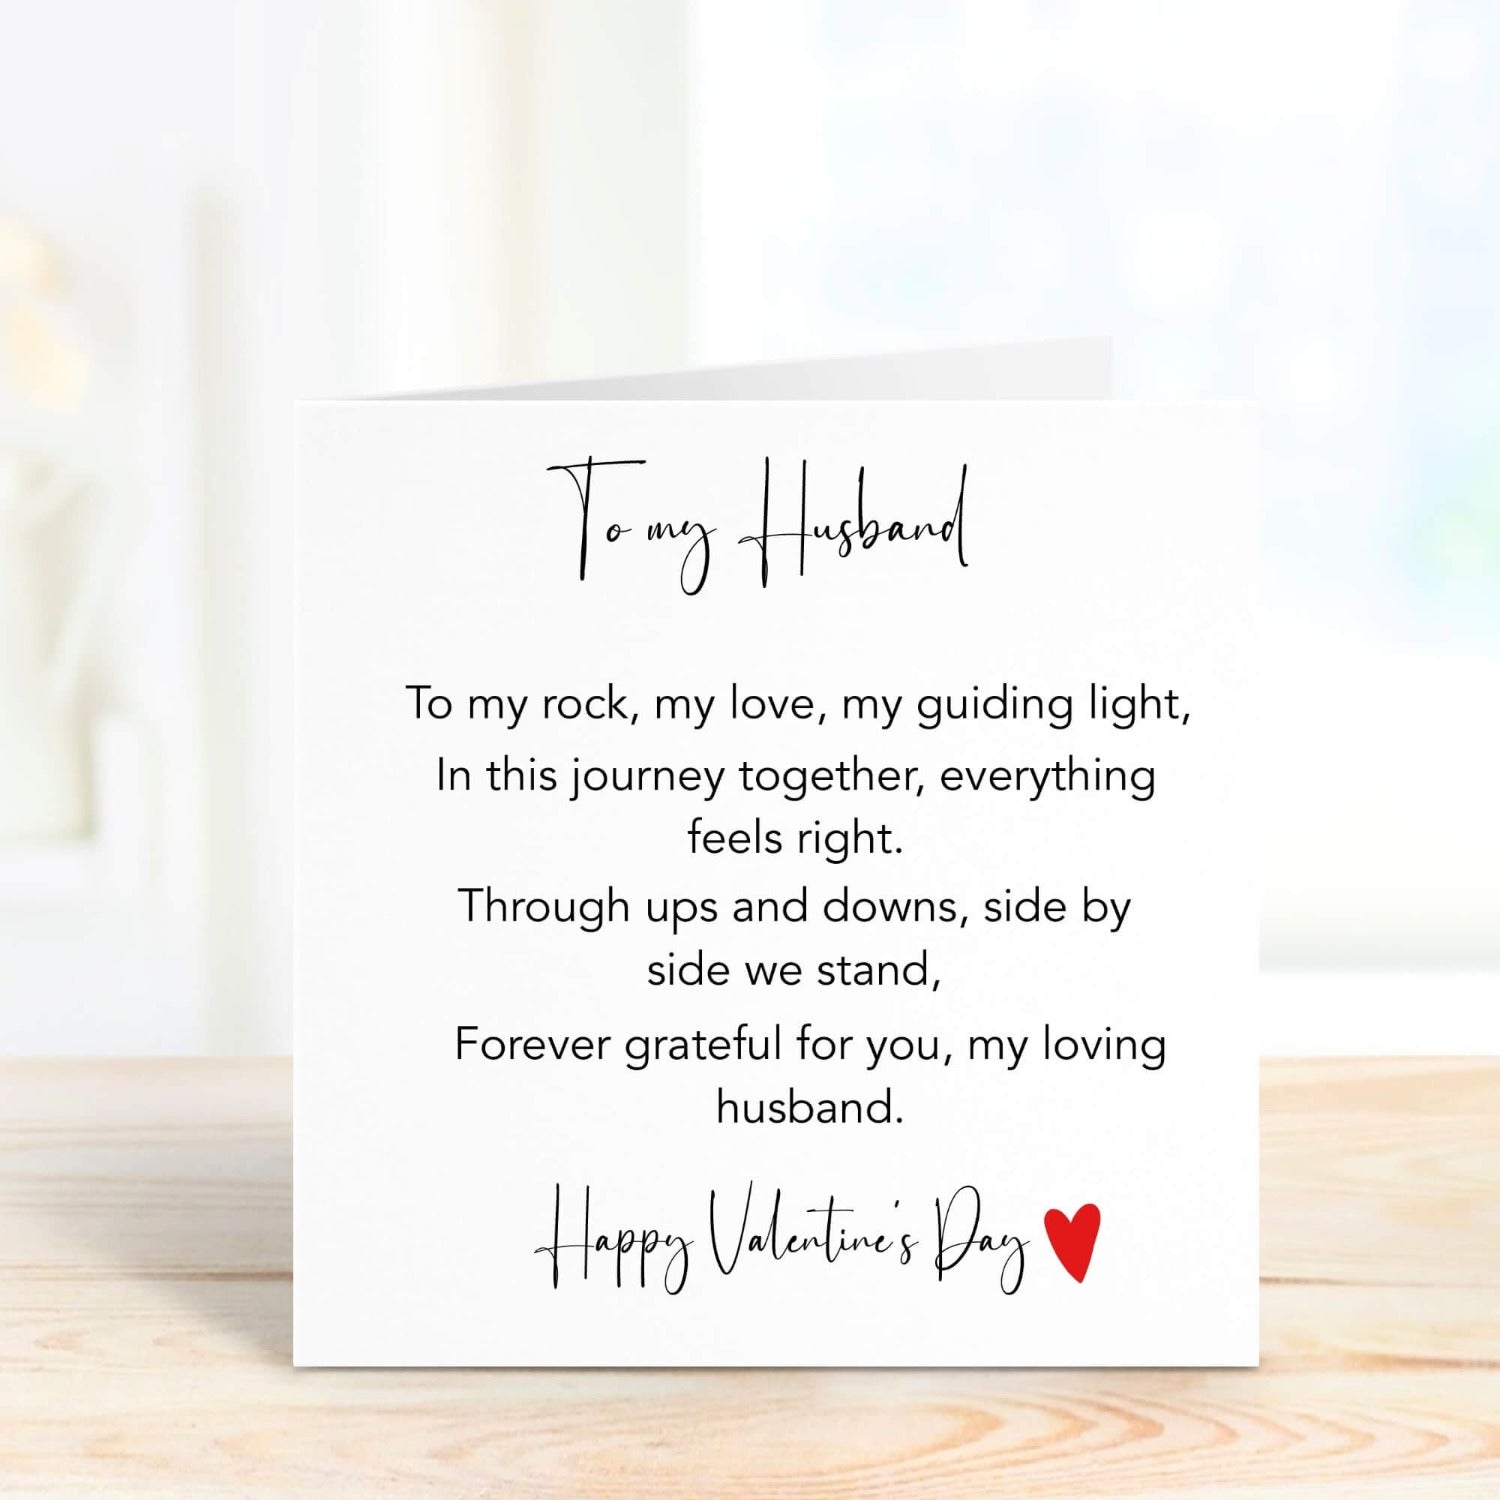 personalised valentine's day card for husband with a poem